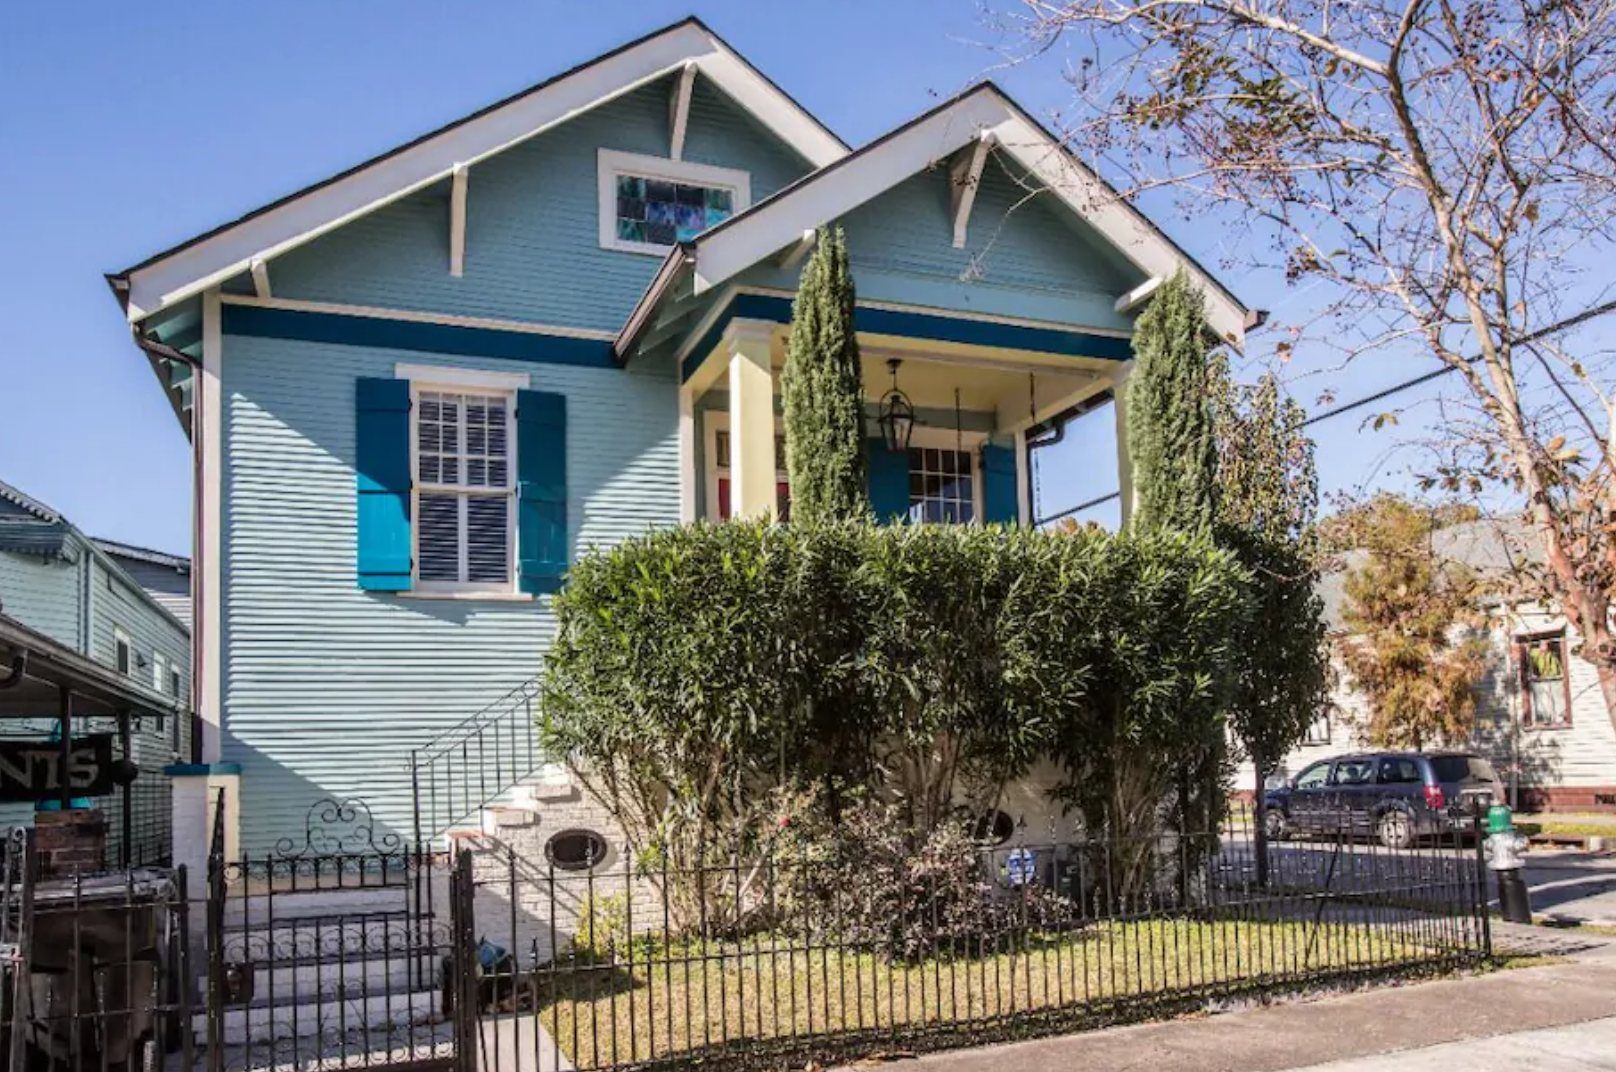 The Best Airbnbs in New Orleans